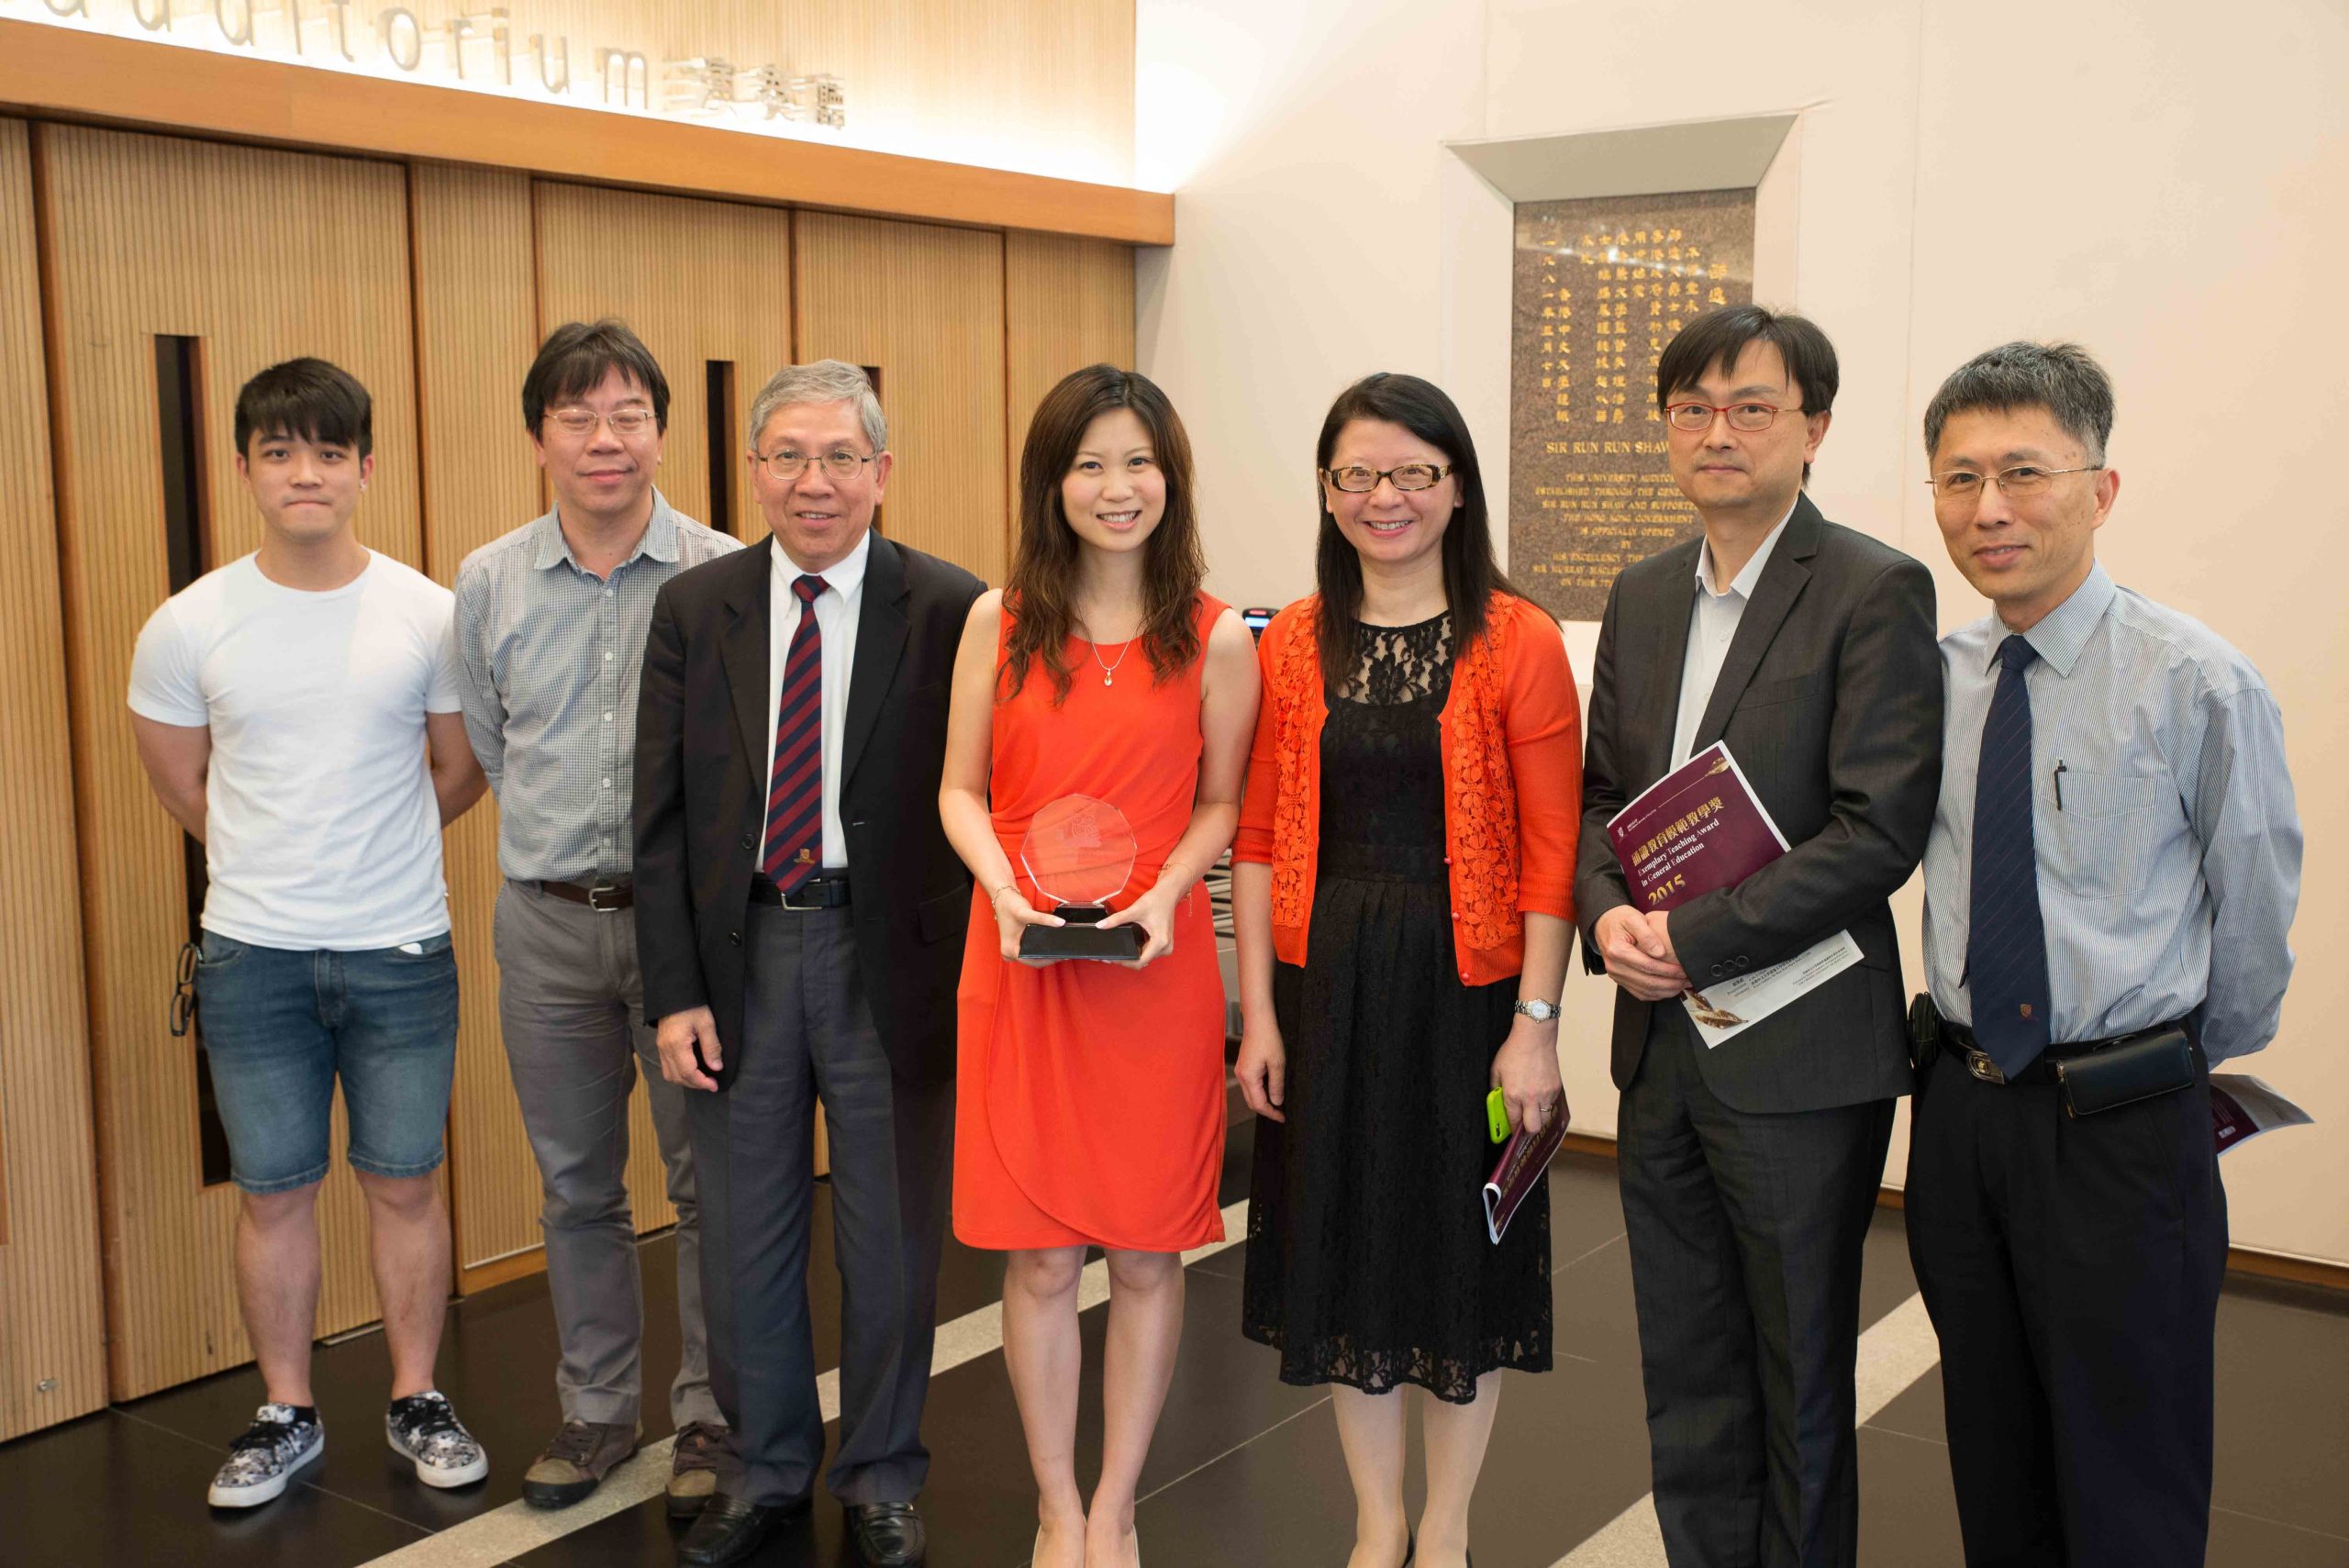 Dr. Lee Kit Ying Rebecca, her colleagues and students